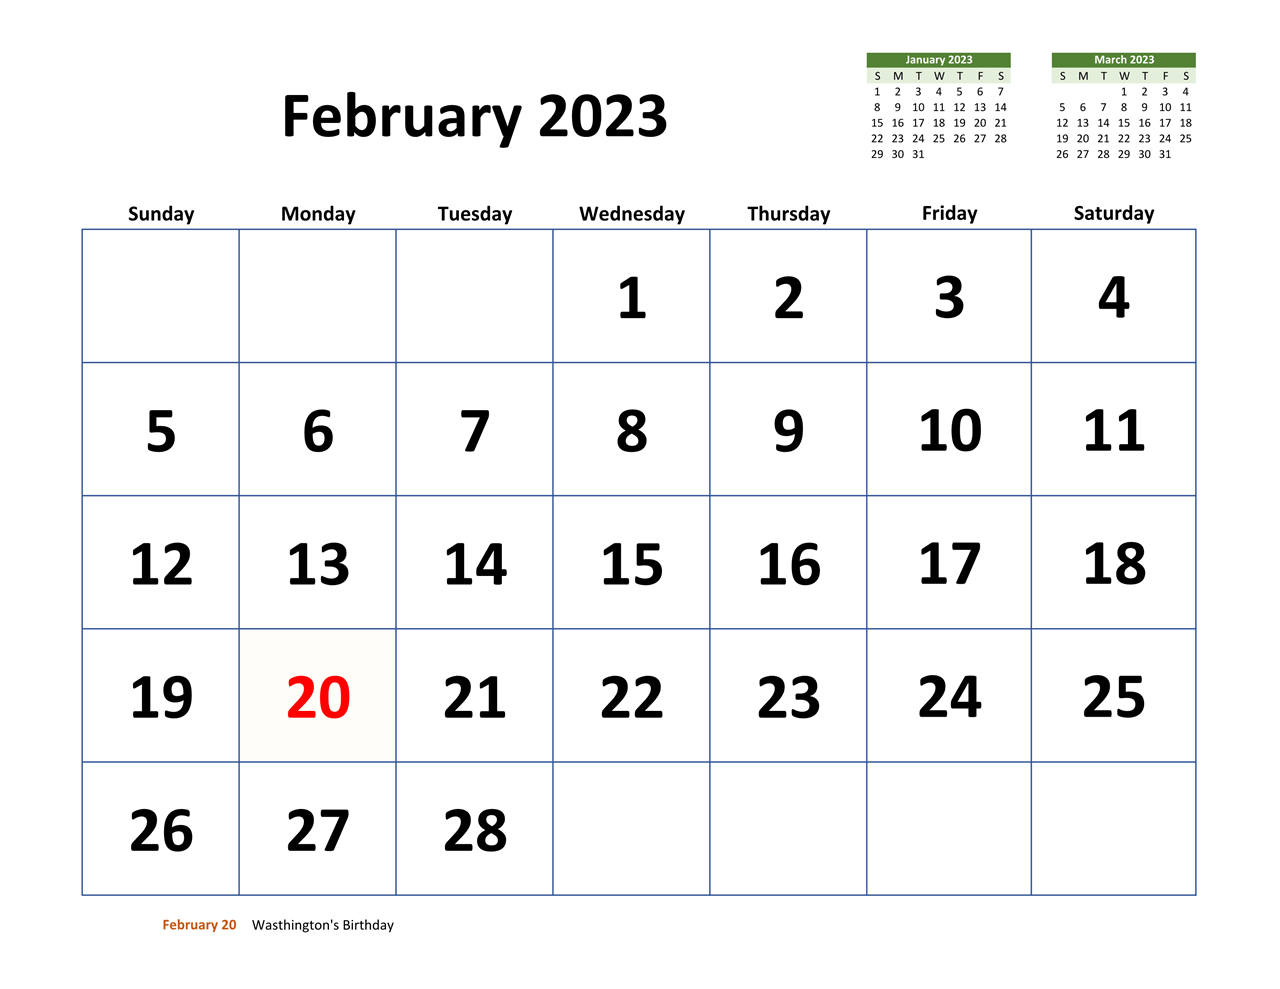 February 2023 Calendar with Extra Large Dates